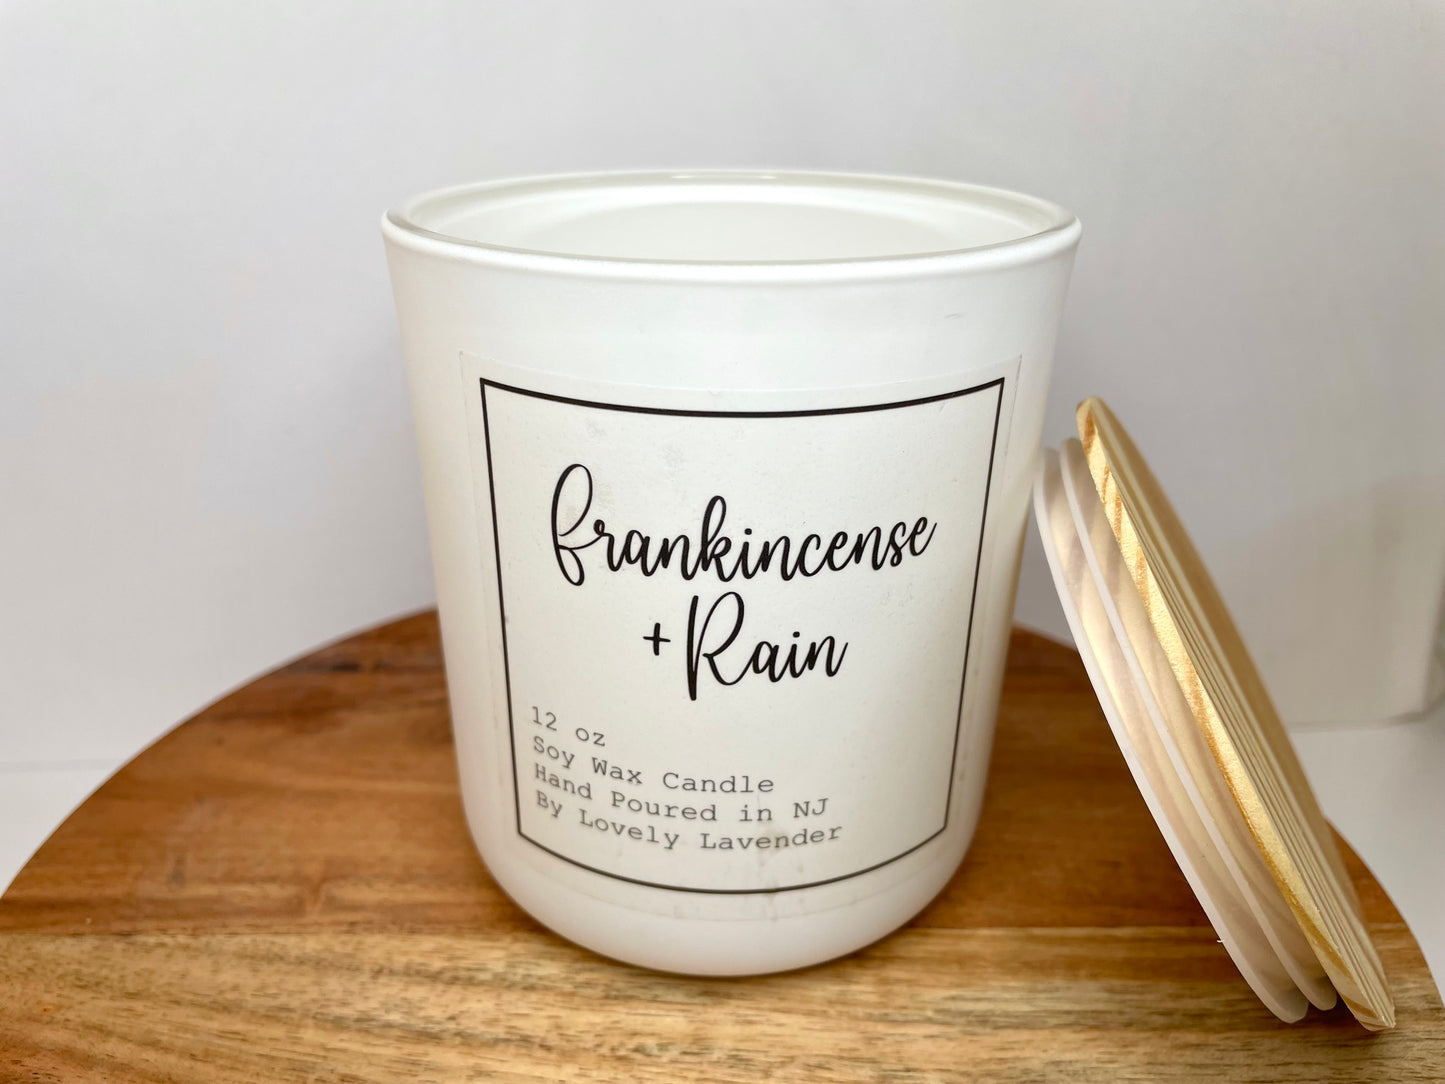 Frankincense + Rain Soy Wax Wood Wick Candle